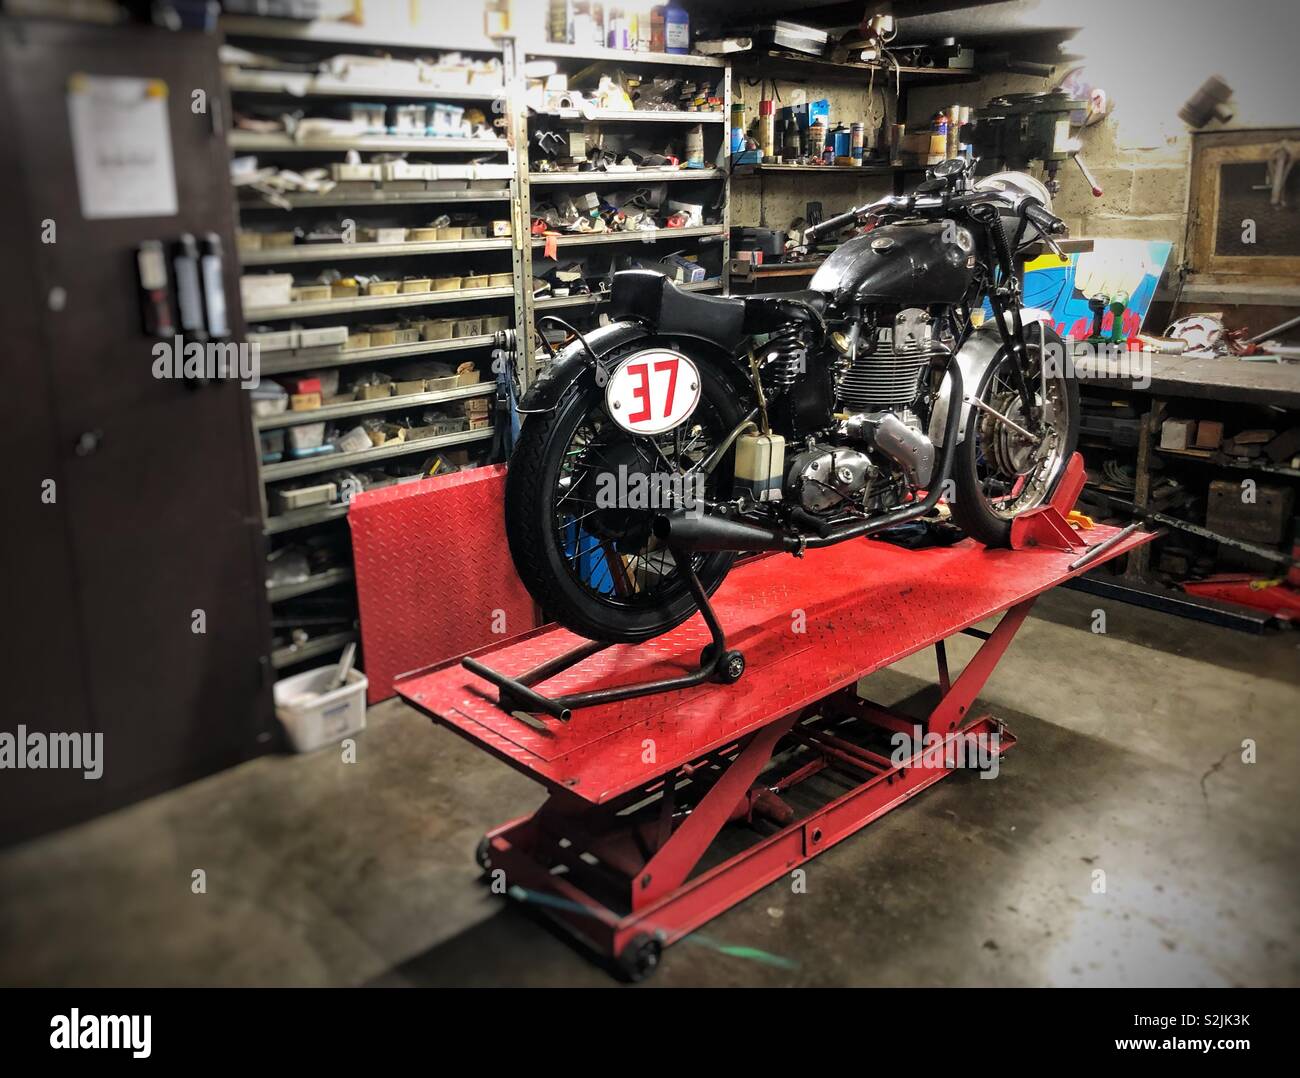 Classic motorcycle in a garage for maintenance Stock Photo - Alamy